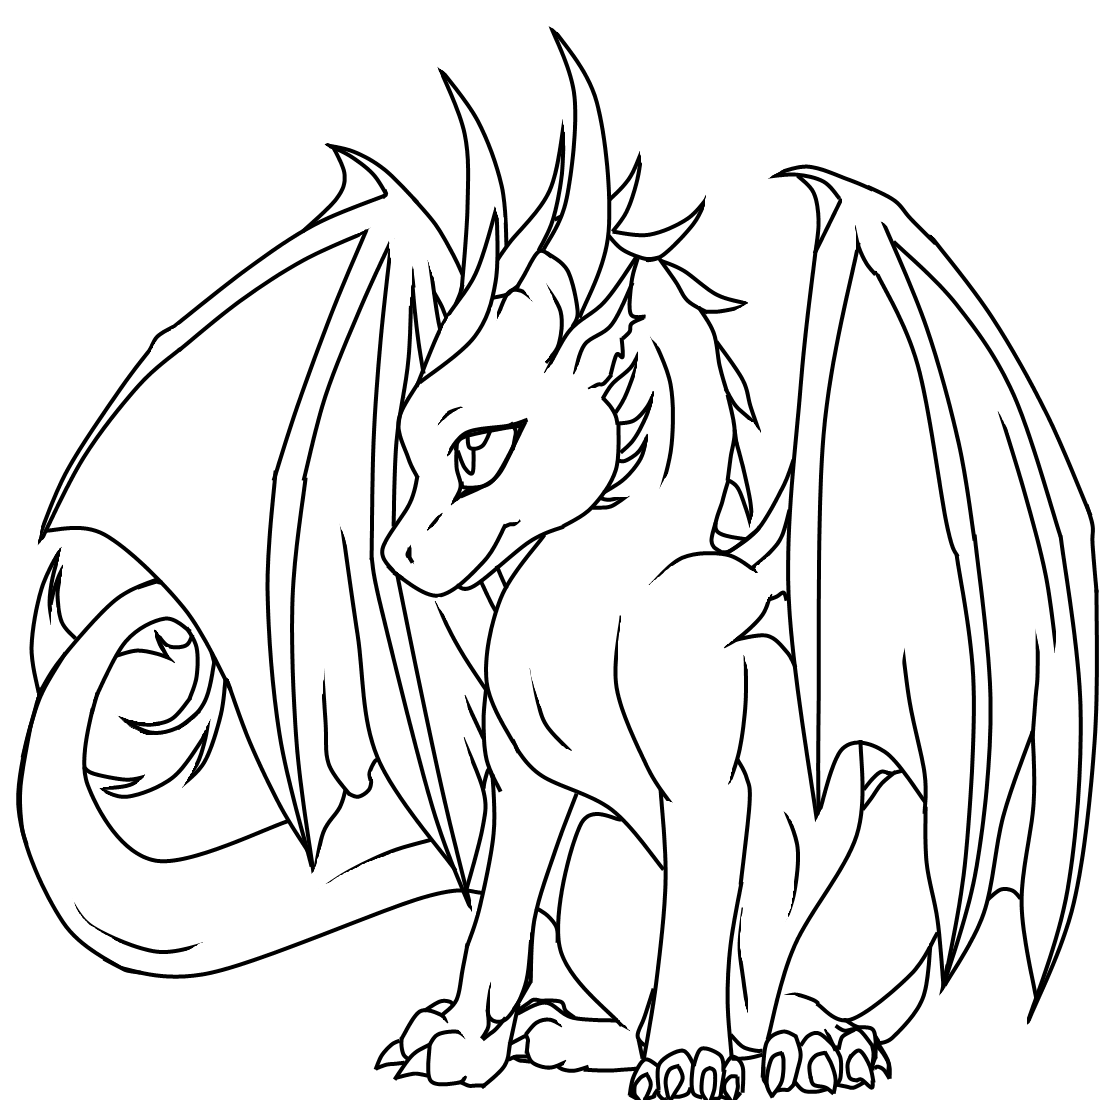 Drawing Dragon #148380 (Characters) – Printable coloring pages